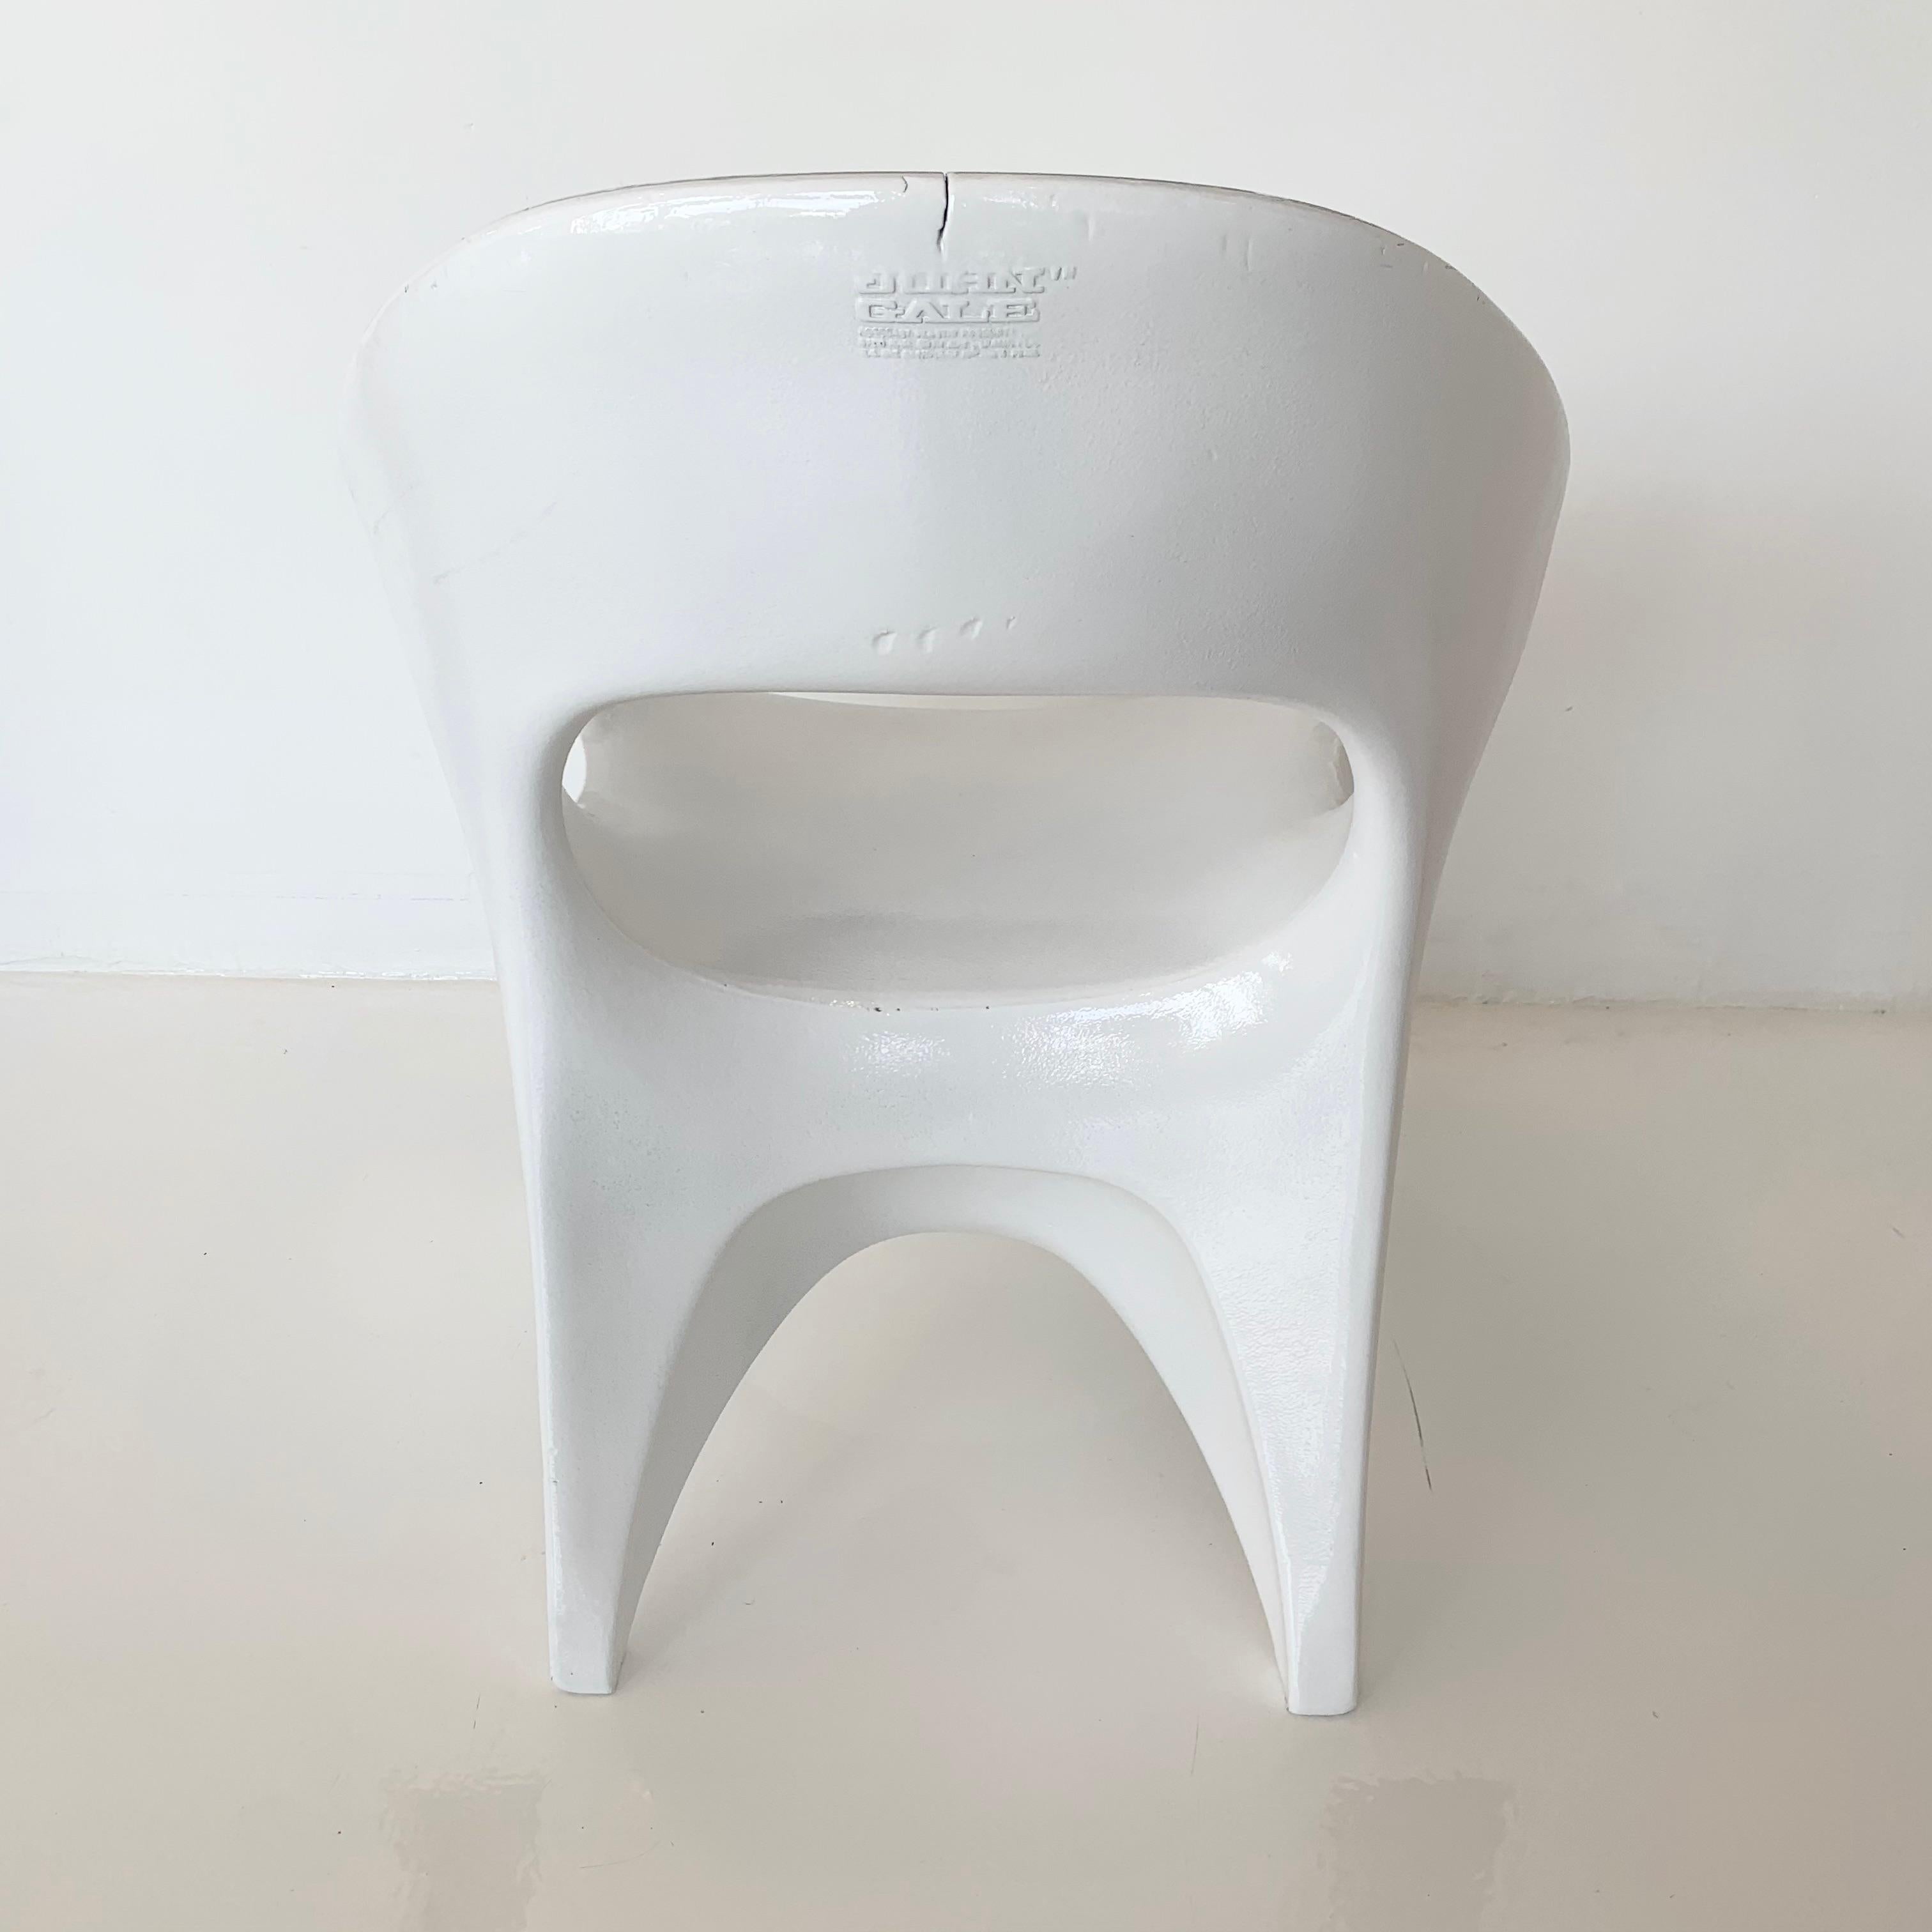 Set of 4 Sculptural Plastic Chairs by John Gale, 1963 For Sale 14